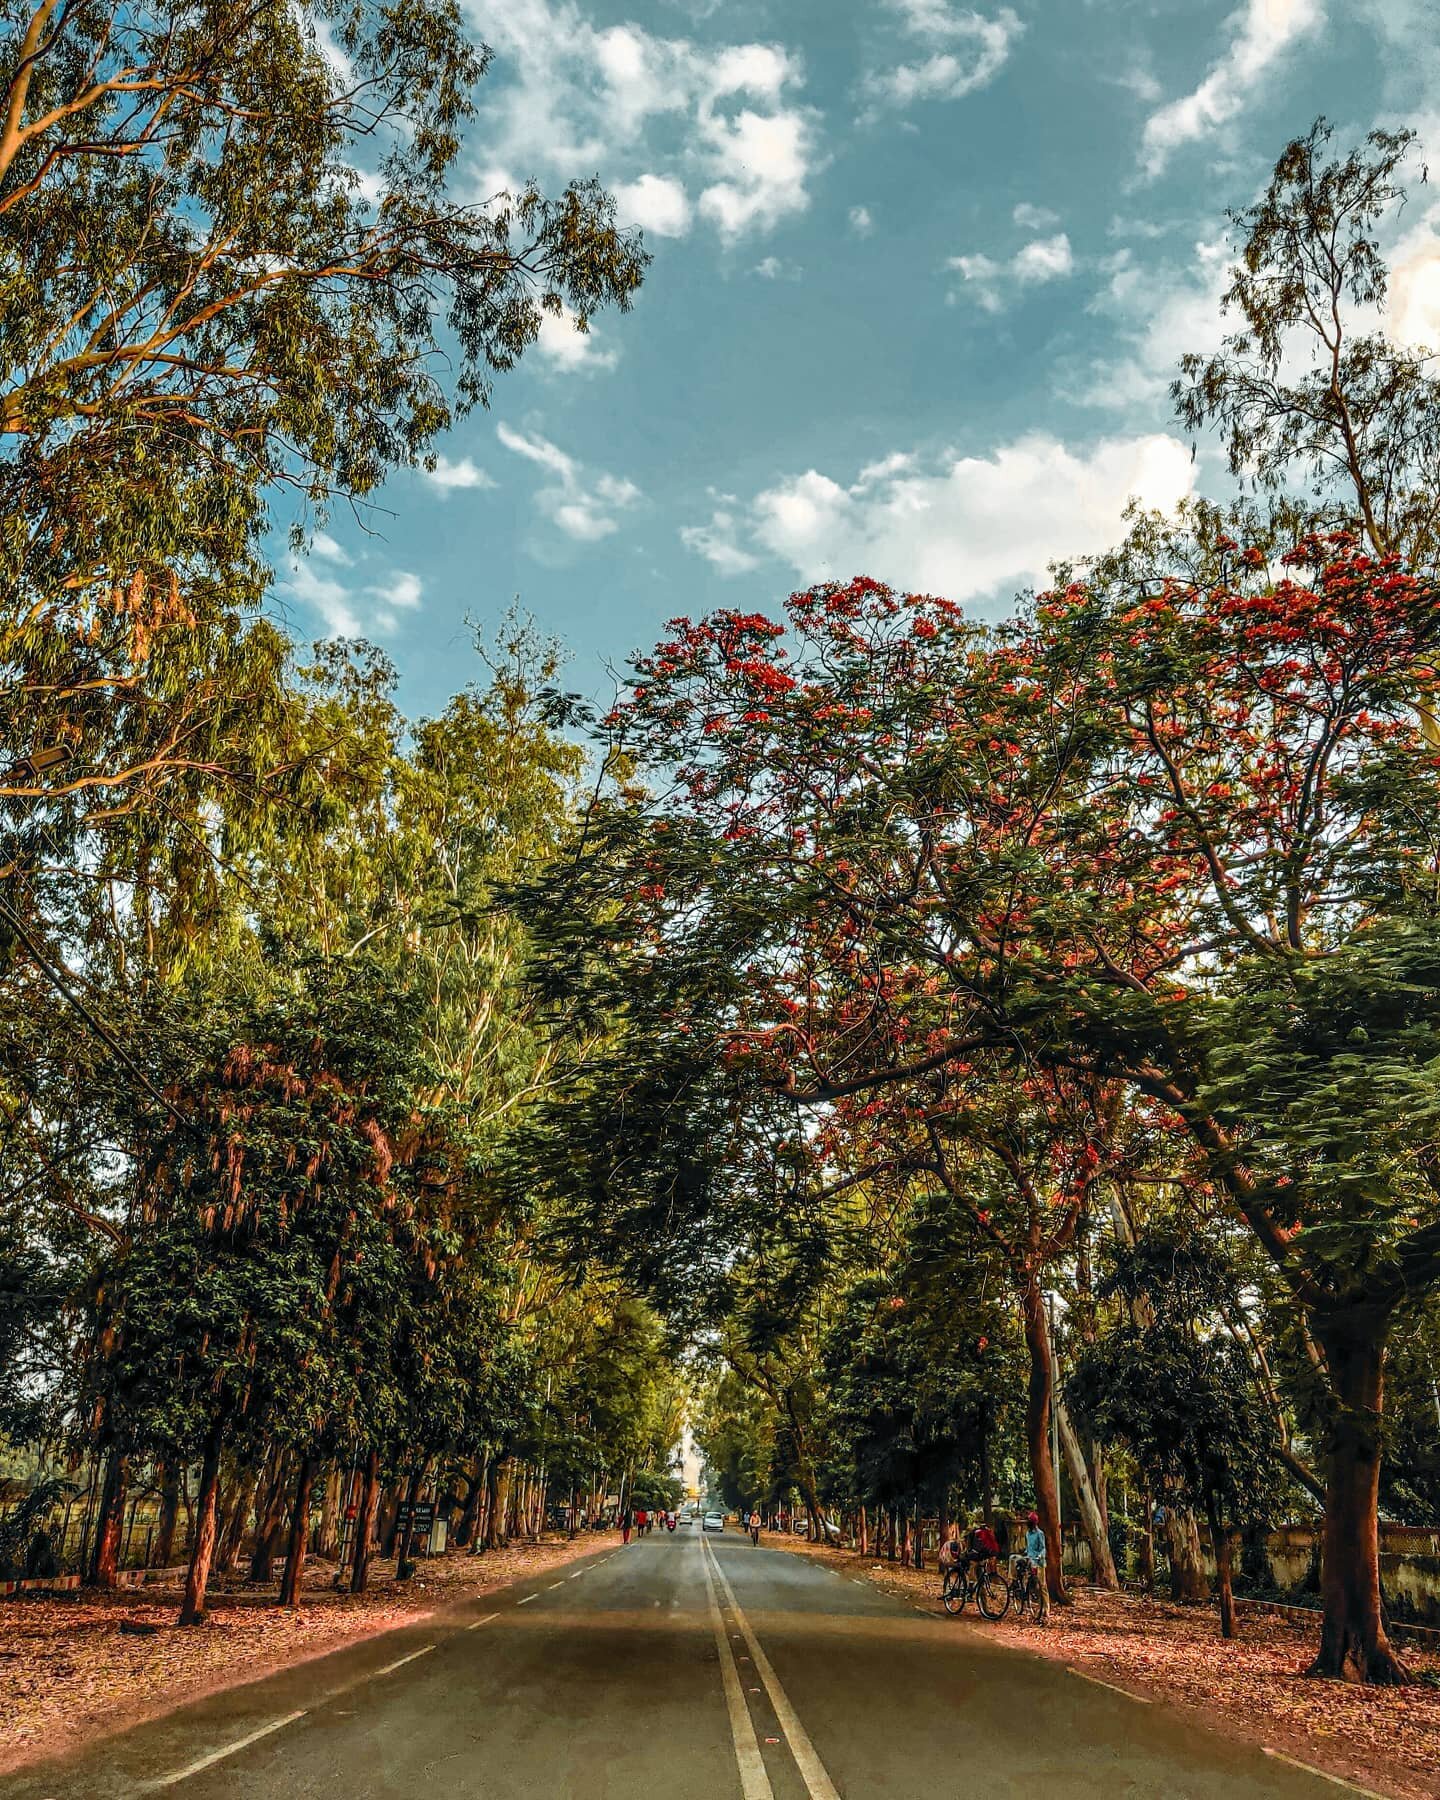 This road near my house know as polo ground road is like one of the most amazing road to drive on.  Shot this image in june while driving around the city.

#photography #photooftheday #photo #photographer #love #nature #instagood #instagram #picofthe